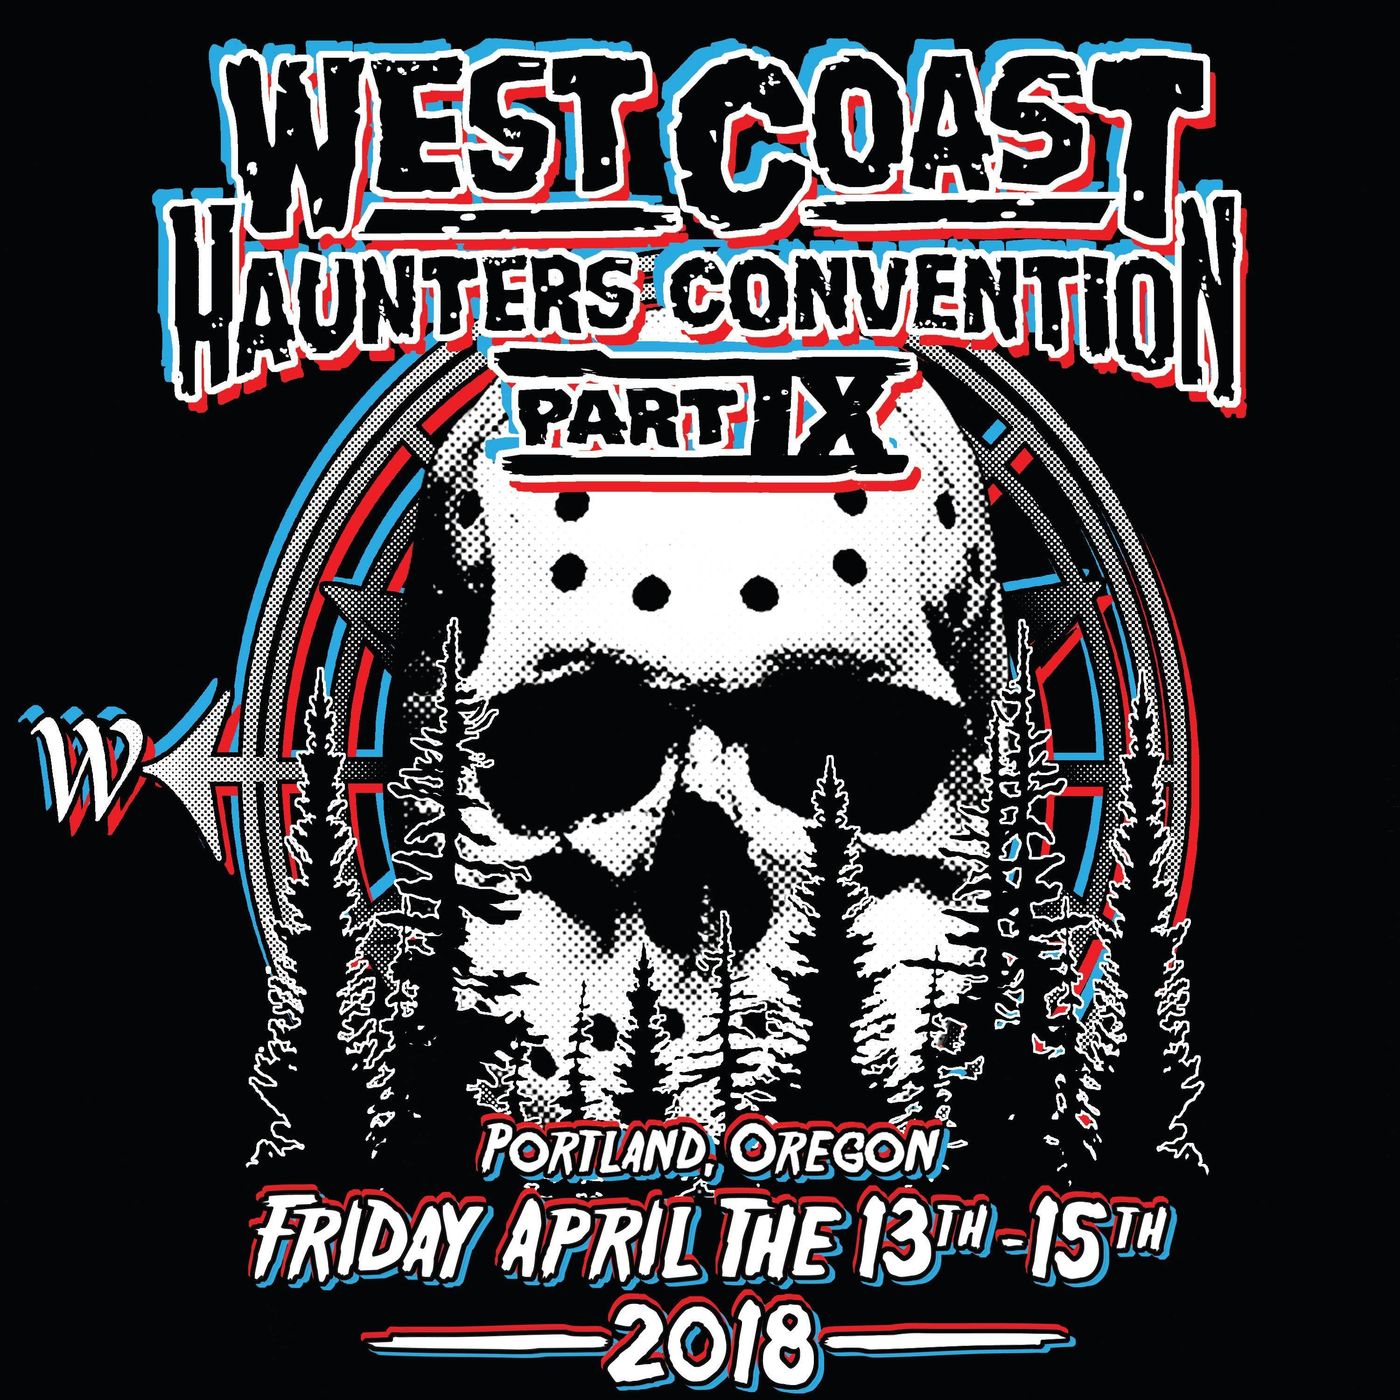 [HaunTopic] What to Expect at the West Coast Haunter's Convention 2018 with Ed Roberts